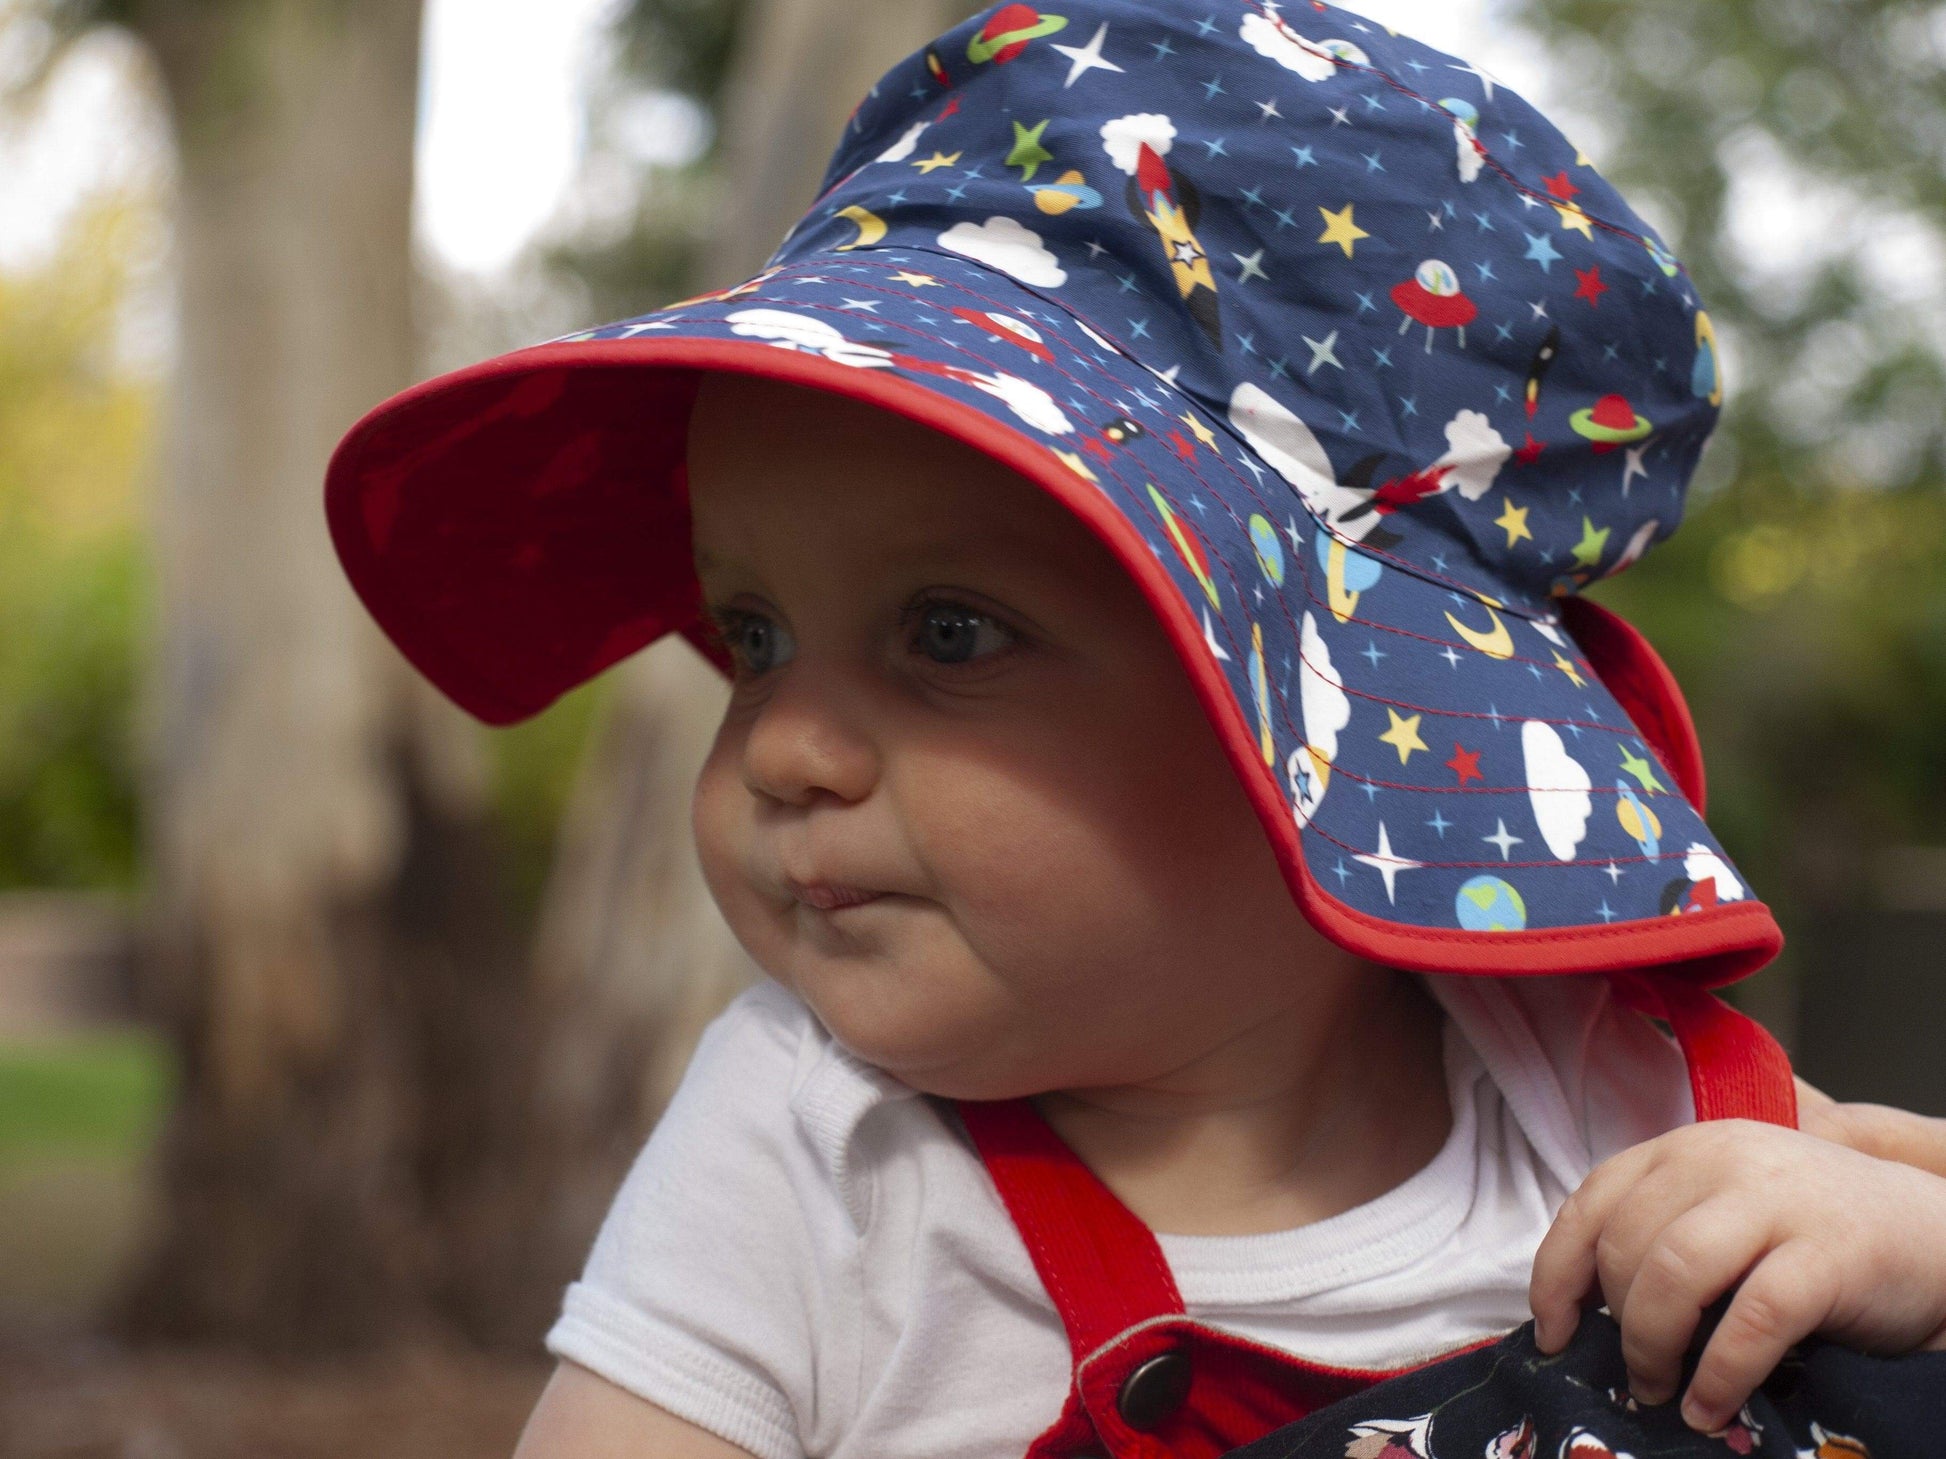 young child wearing overalls and a banz reversible bucket hat outside - background is blurred trees